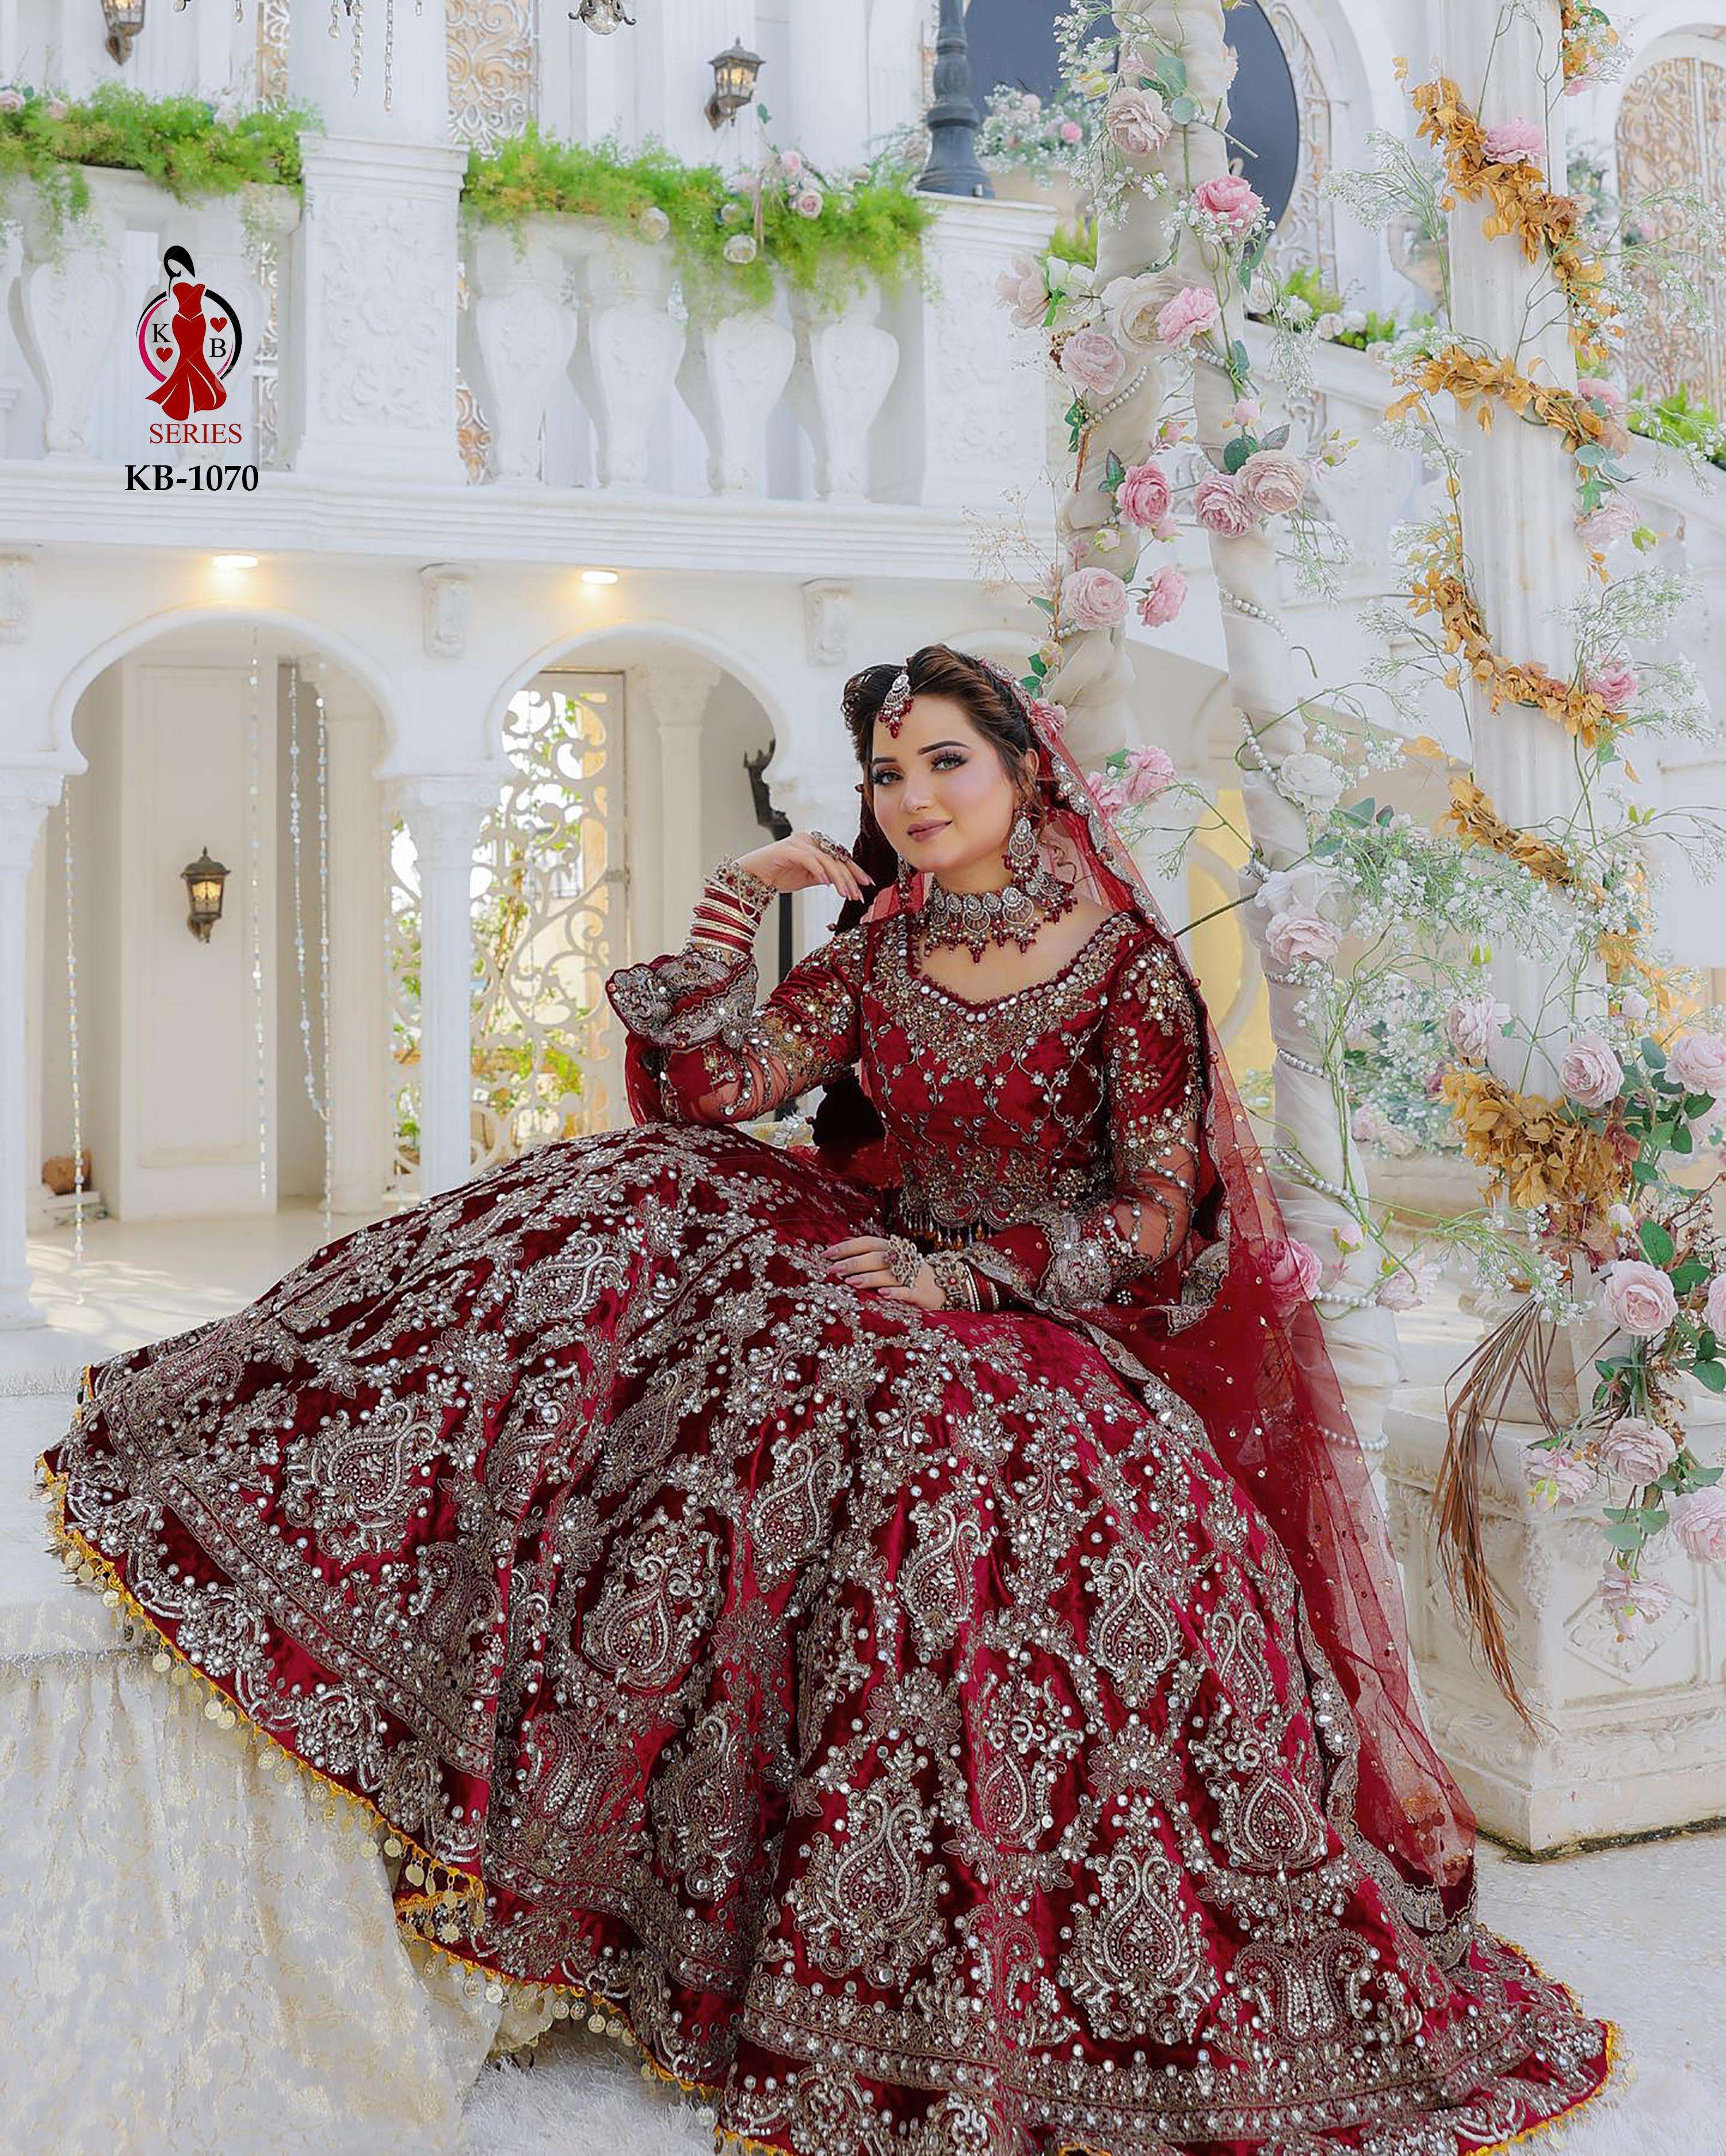 45+ Full Sleeves Blouses To Pick For Your Winter Wedding | Red bridal dress,  Pakistani bridal dresses, Bridal dresses pakistan